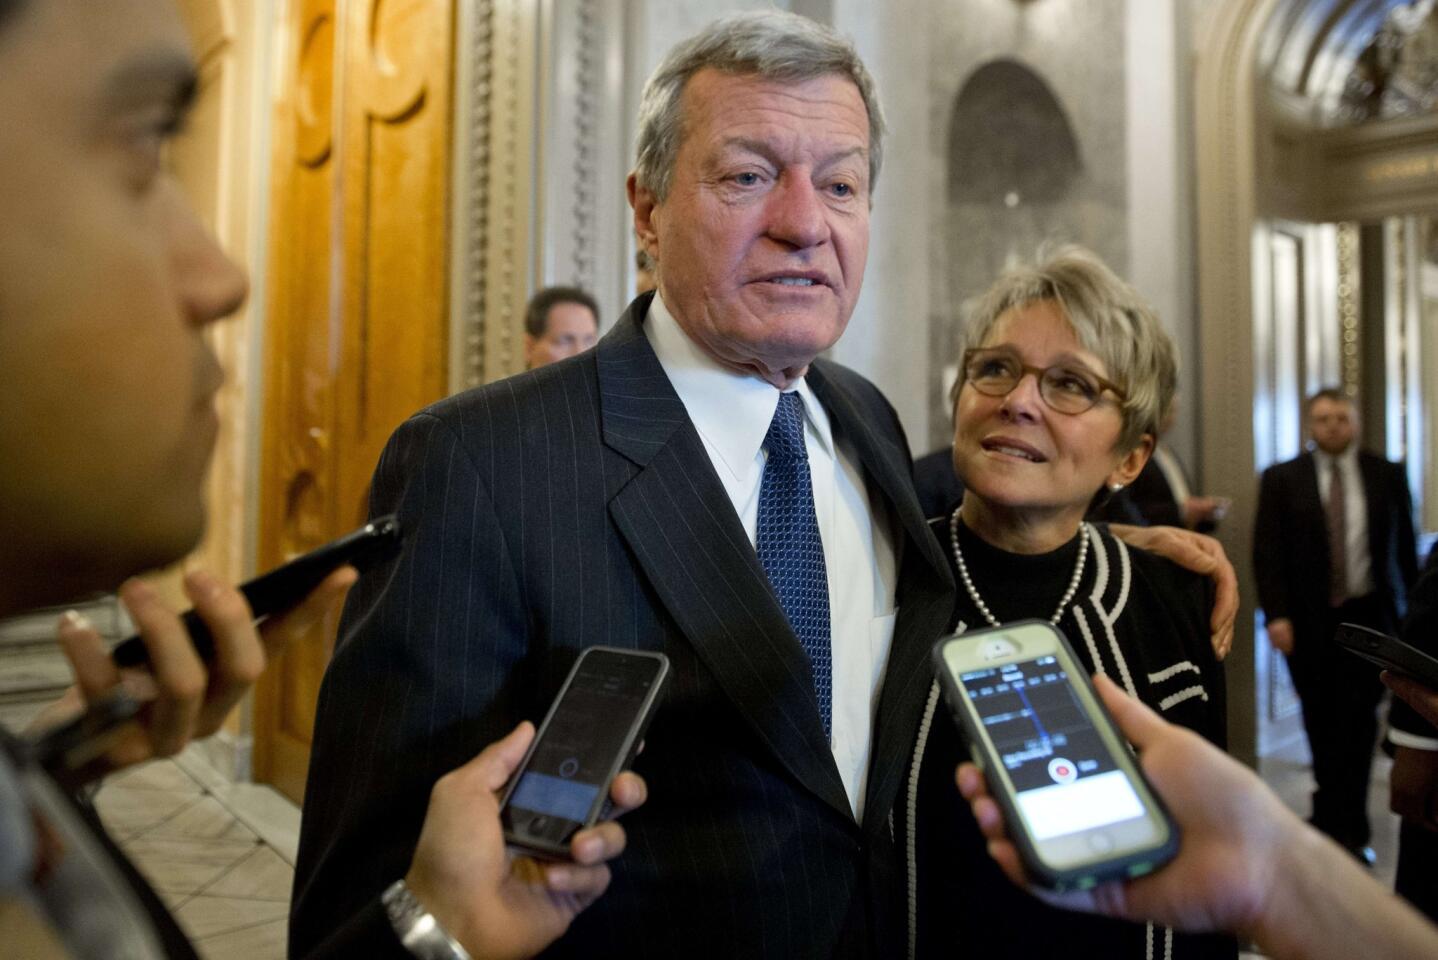 Sen. Max Baucus (D-Mont.) left the Senate after he was confirmed Feb. 6 to serve as the next ambassador to China. Chairman of the Senate Finance Committee, Baucus played a key role in writing what became President Obama's Affordable Care Act.